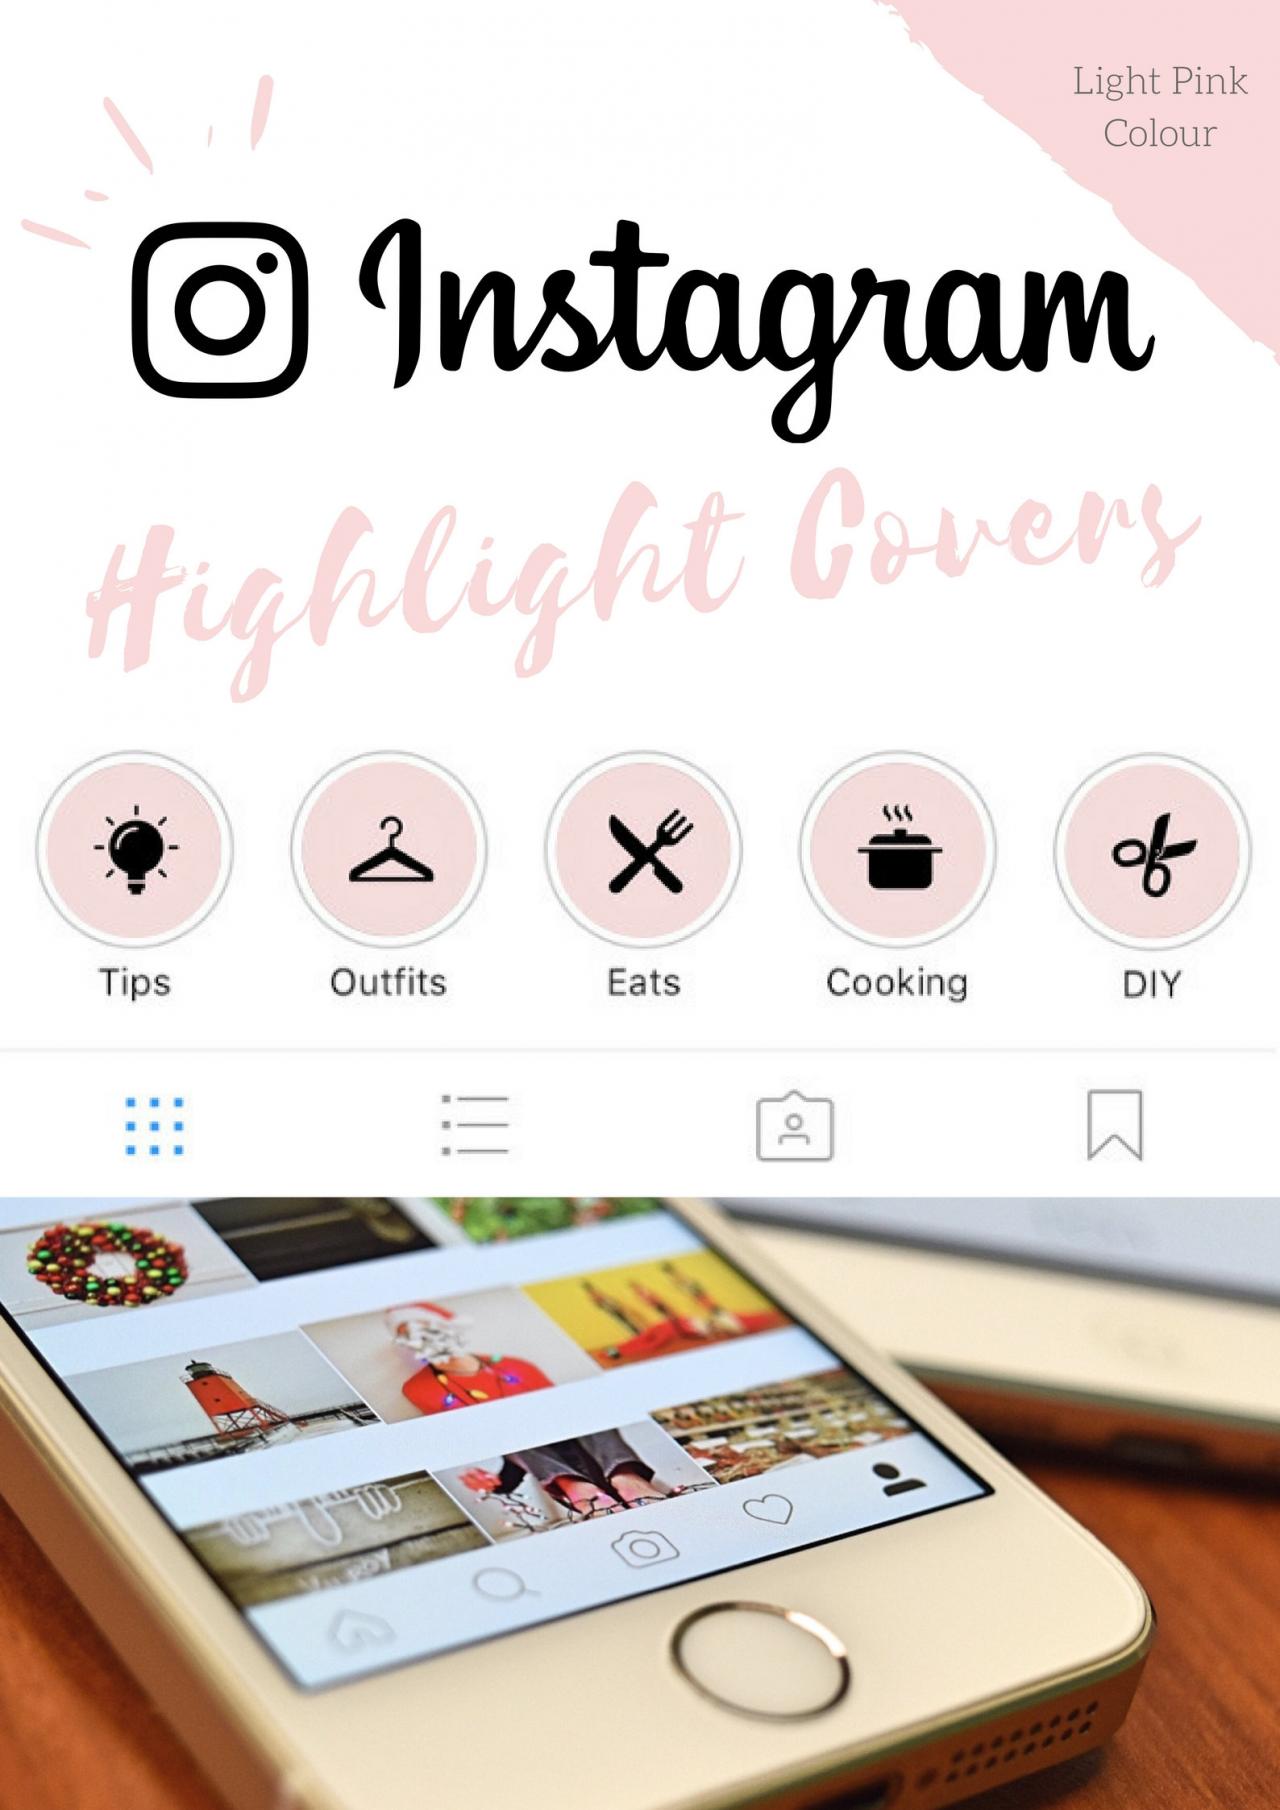 70 Instagram Stories Highlight Covers in Light Pink Colour.